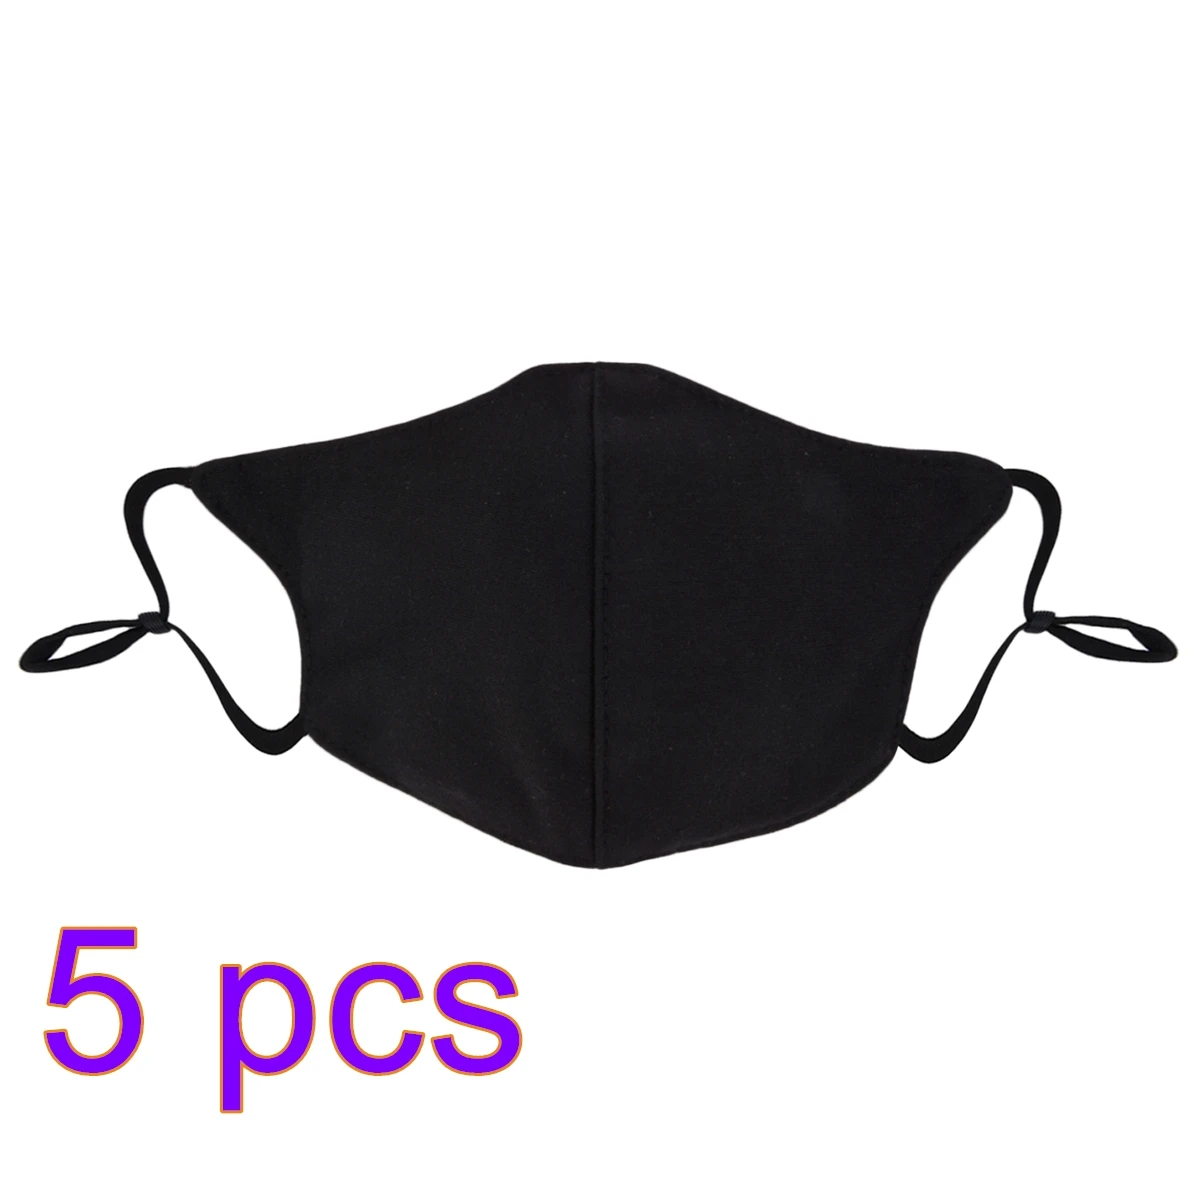 

5pcs Washable elastic Earloop Face Breathing Mask Reusable Anti Dust Cotton Mouth Mask Fashion Black Mask For Adults